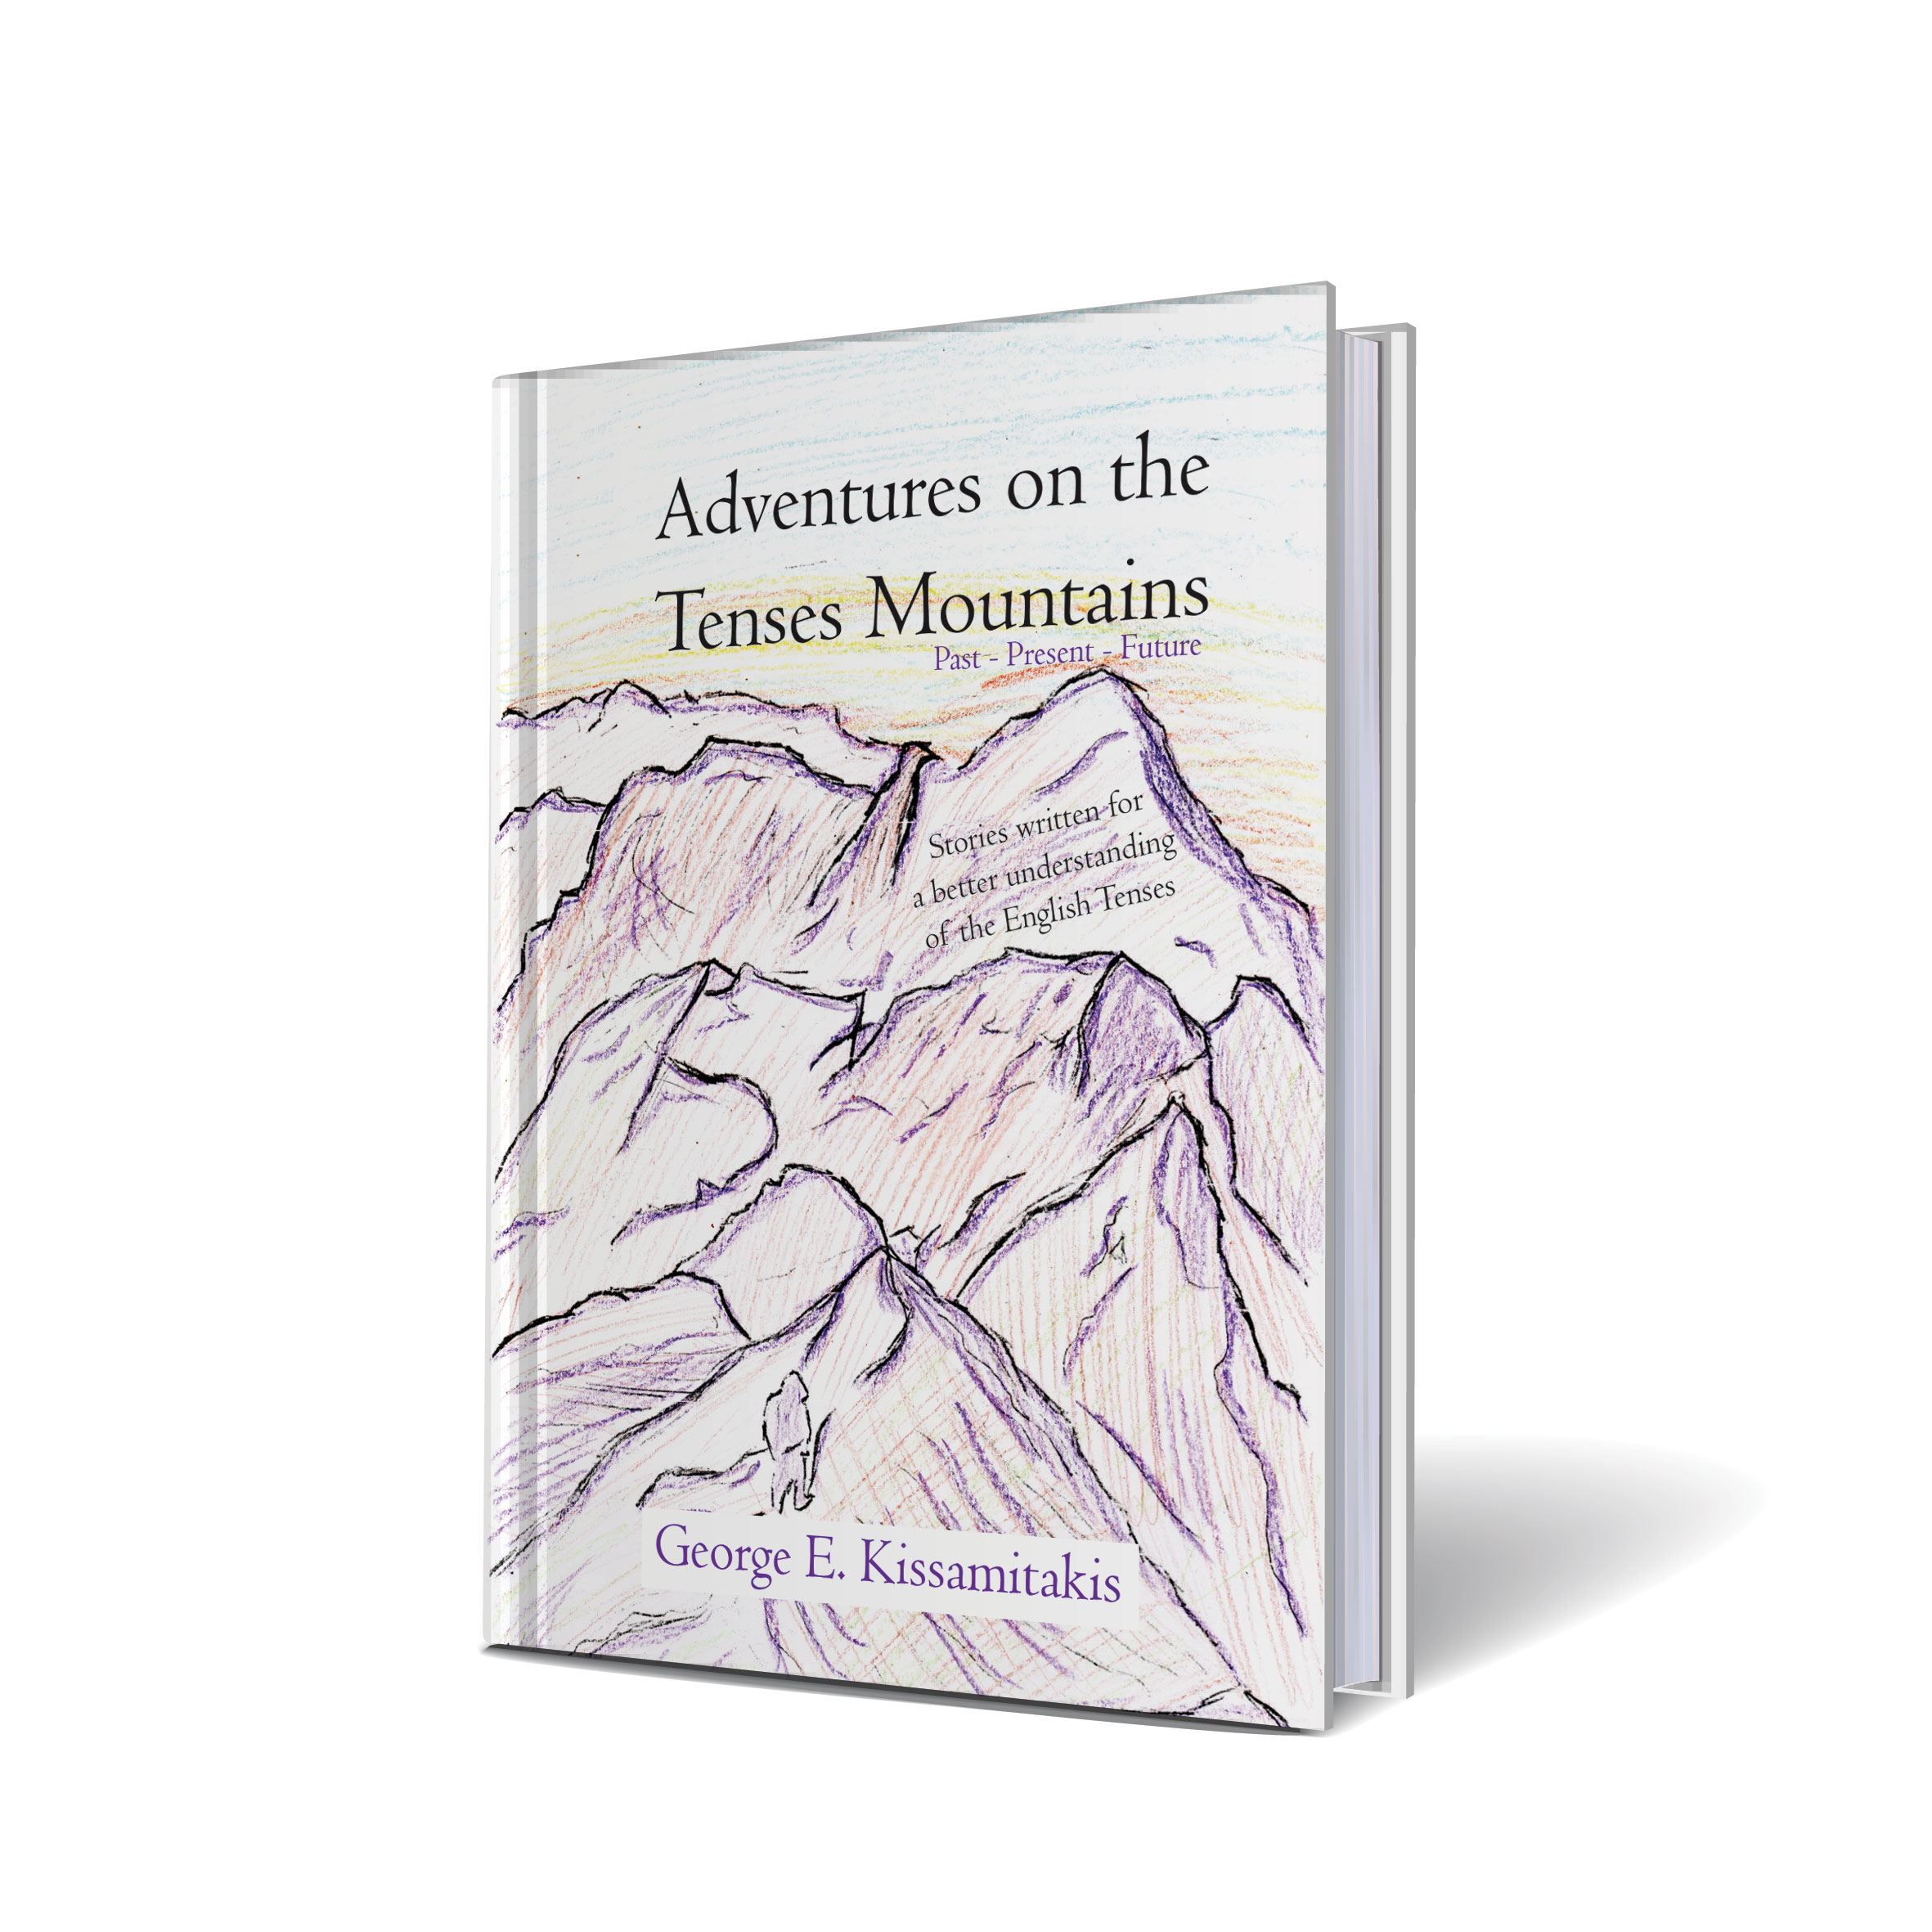 Adventures on the Tenses Mountains book